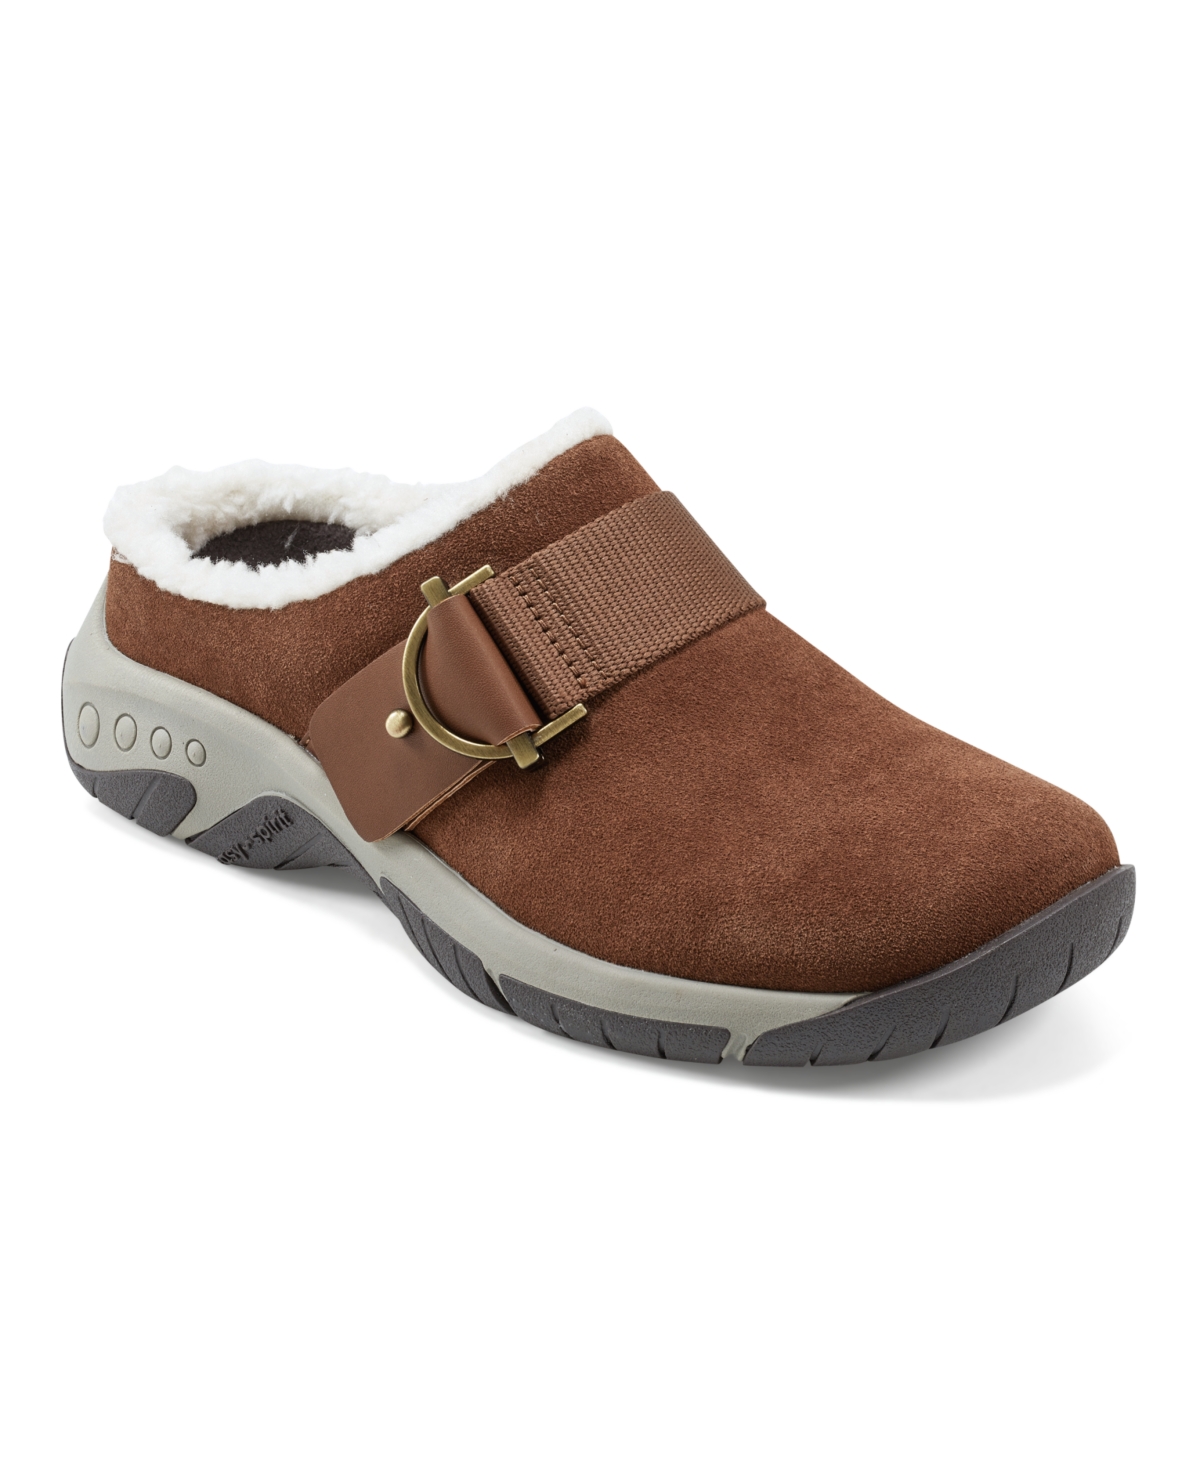 Women's Wend Slip-On Closed Toe Casual Clogs - Gray Suede